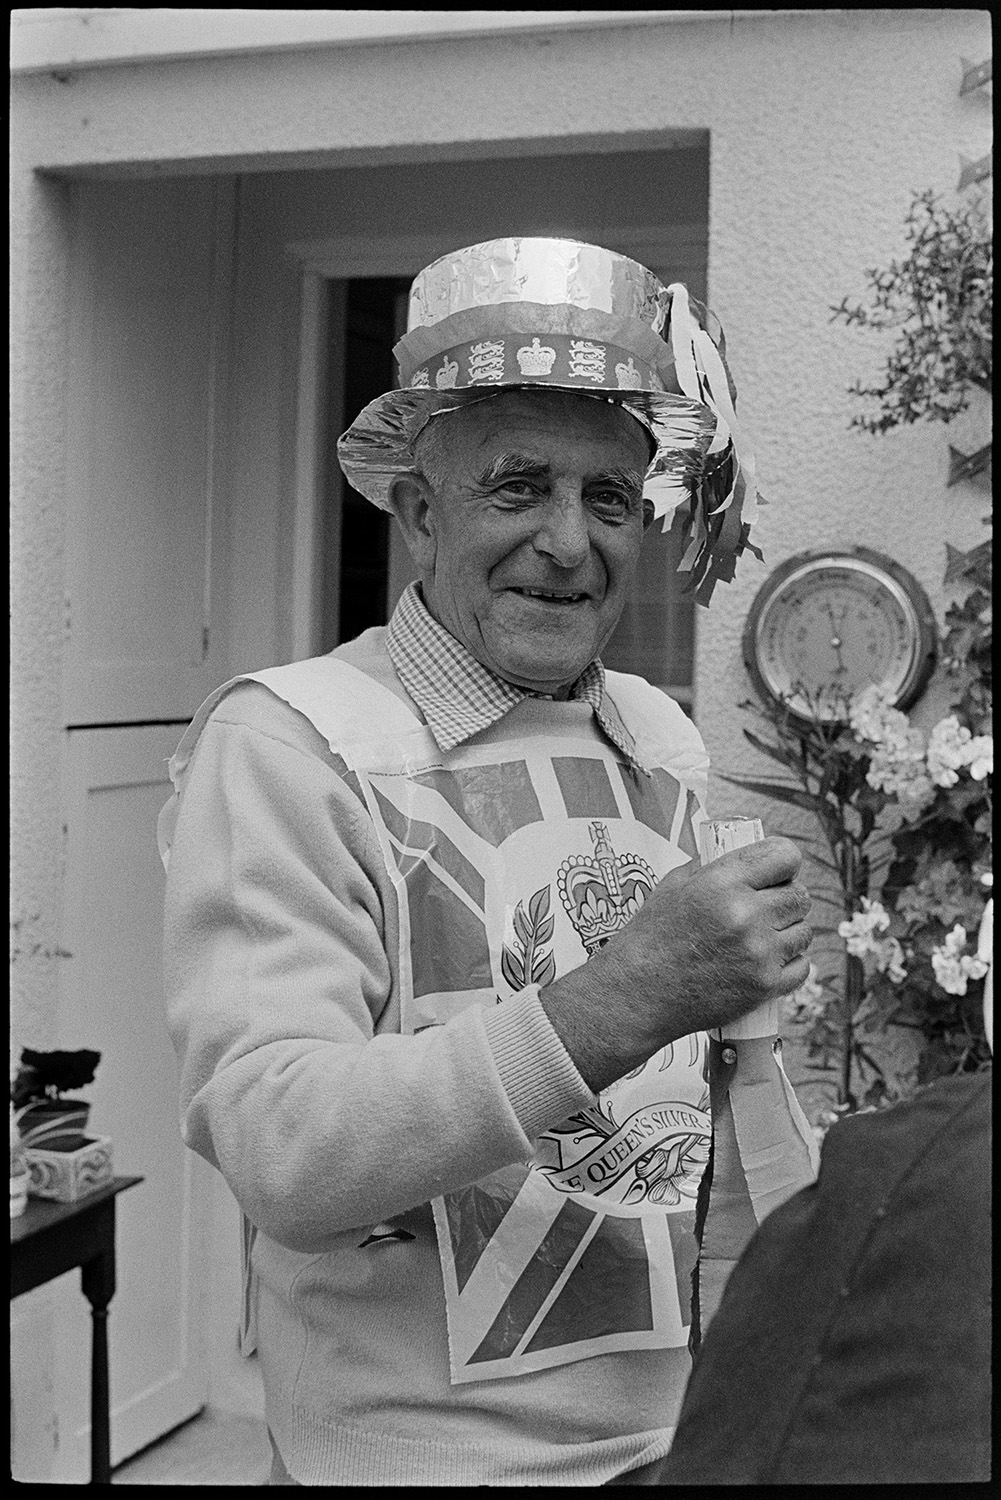 People dressed up for cake procession, Jubilee Day. 
[A man dressed up in a handmade foil  top hat and Union Jack flag for a cake procession in Dolton on the Silver Jubilee of Queen Elizabeth II.]